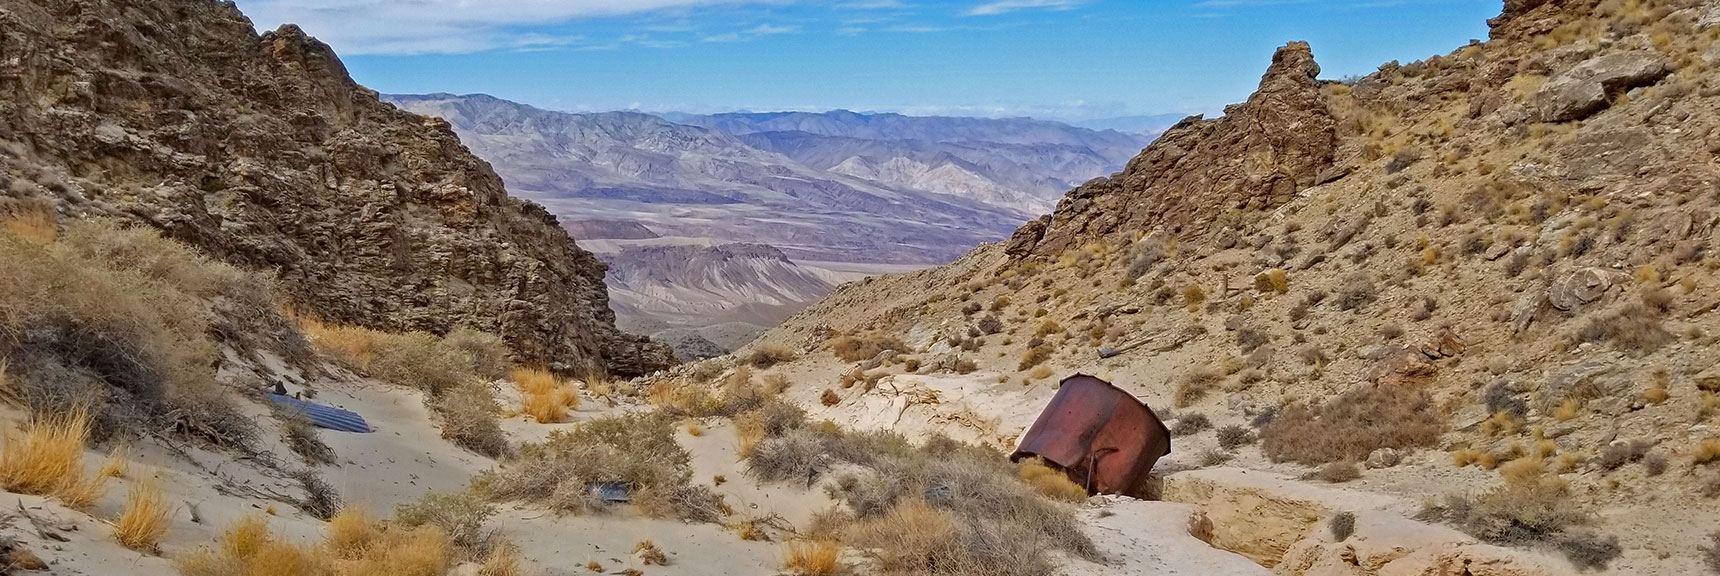 At the Bottom of Skidoo Stamp Mill, View Toward Emigrant Canyon Area | Skidoo Stamp Mill, Panamint Mountains, Death Valley National Park, CA